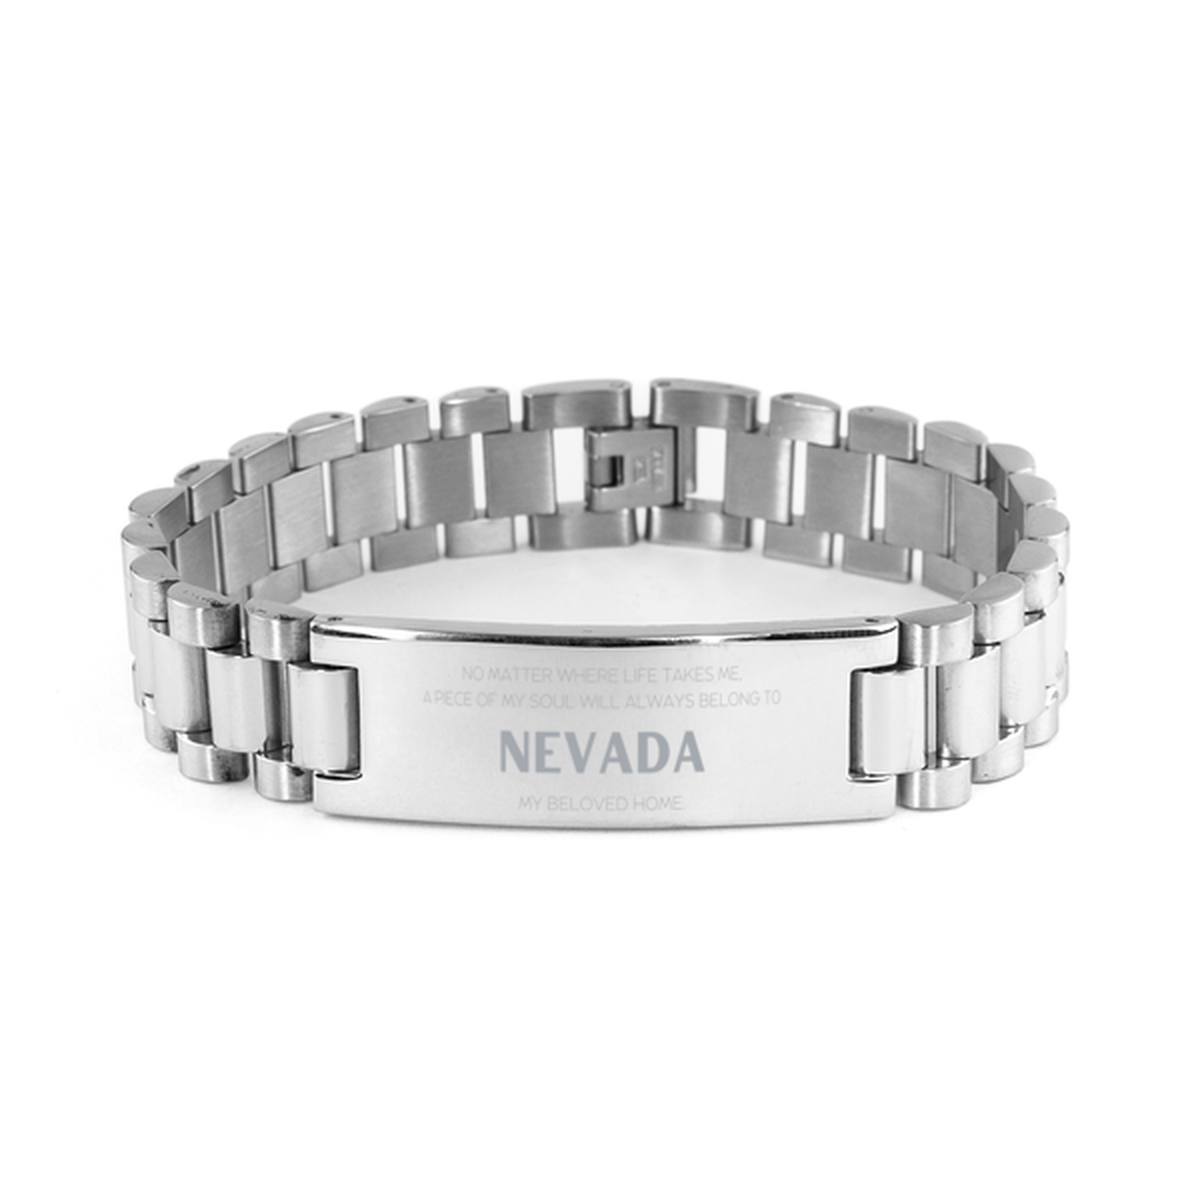 Love Nevada State Gifts, My soul will always belong to Nevada, Proud Ladder Stainless Steel Bracelet, Birthday Unique Gifts For Nevada Men, Women, Friends